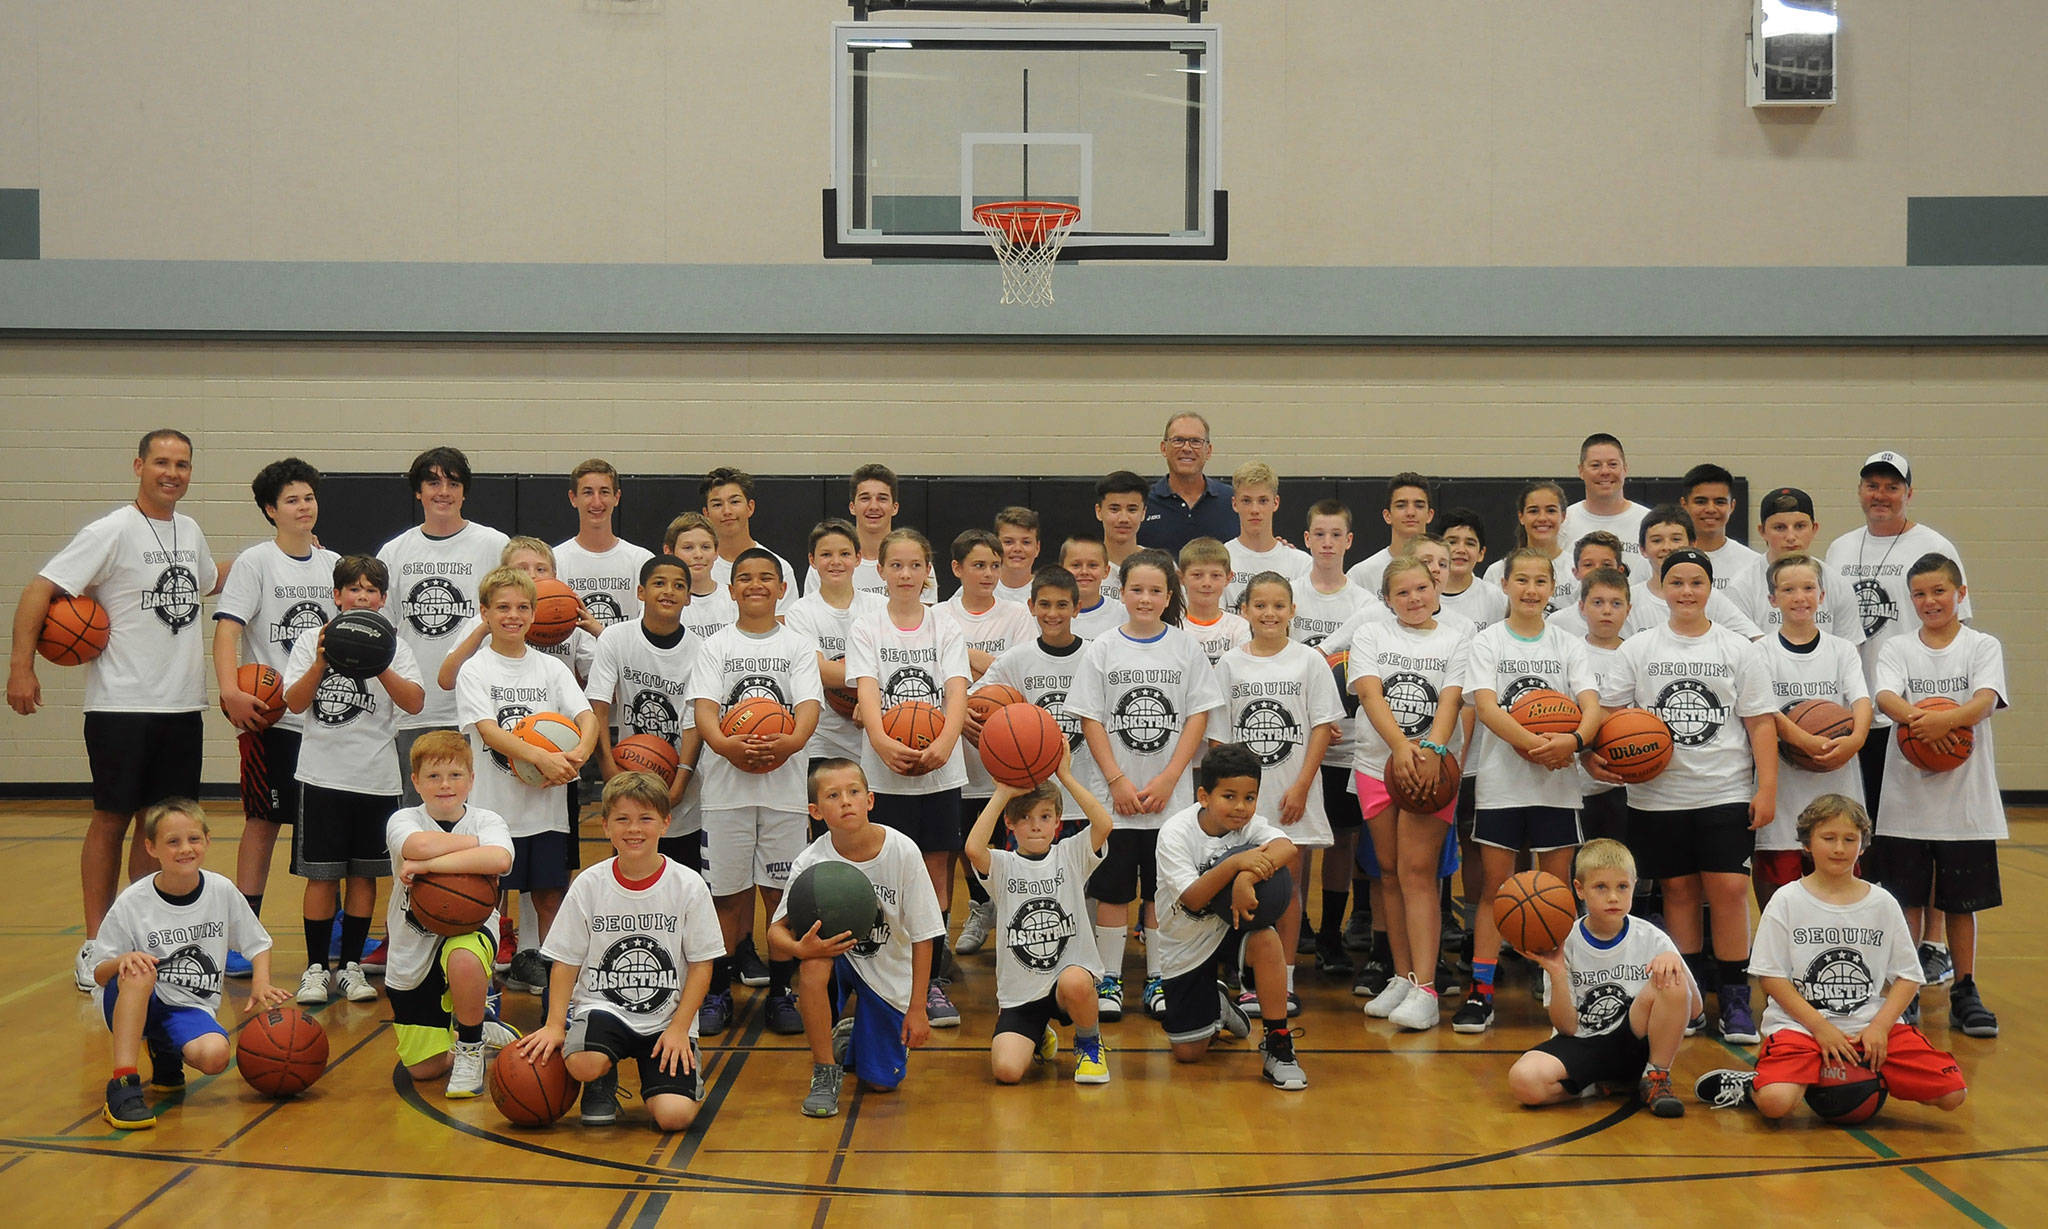 Former NBA star Kurt Rambis (back row, center) joins Sequim Youth Basketball players at their camp in Sequim on July 27. Sequim Gazette photos by Michael Dashiell